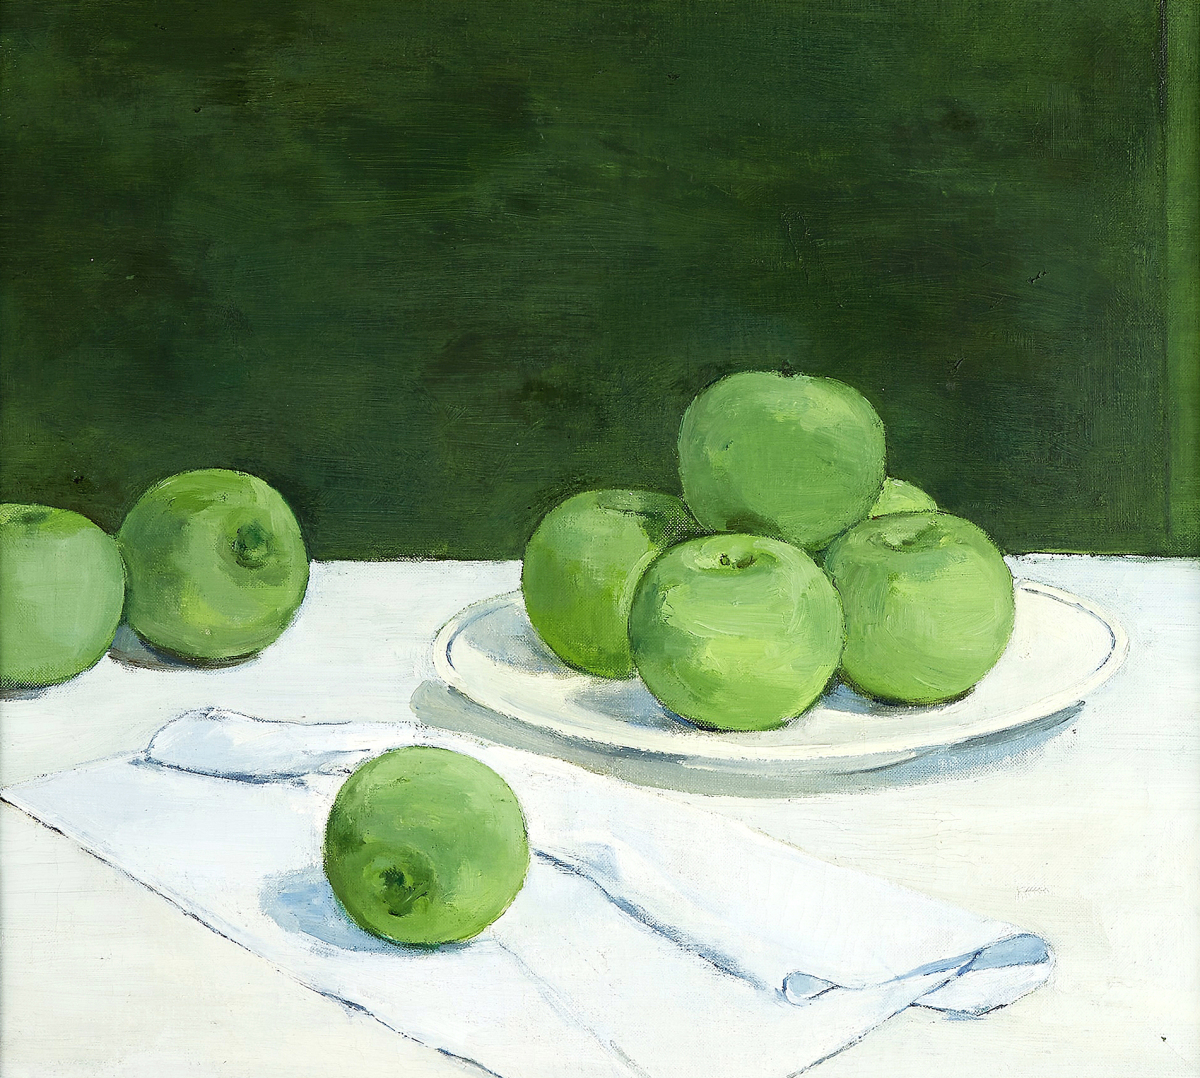 Albert York’s auction record now stands at $239,400 with “Still Life: Green Apples,” a 20-by-22-inch oil on canvas. “It struck me as a little more conventional, less like his others,” Alasdair Nichol, chairman at Freeman’s, said. “He was known for doing pastoral scenes and still lifes. I hadn’t seen anything like this, but there was no question it was a very appealing painting.” Nichol said it sold to a Philadelphia collector.